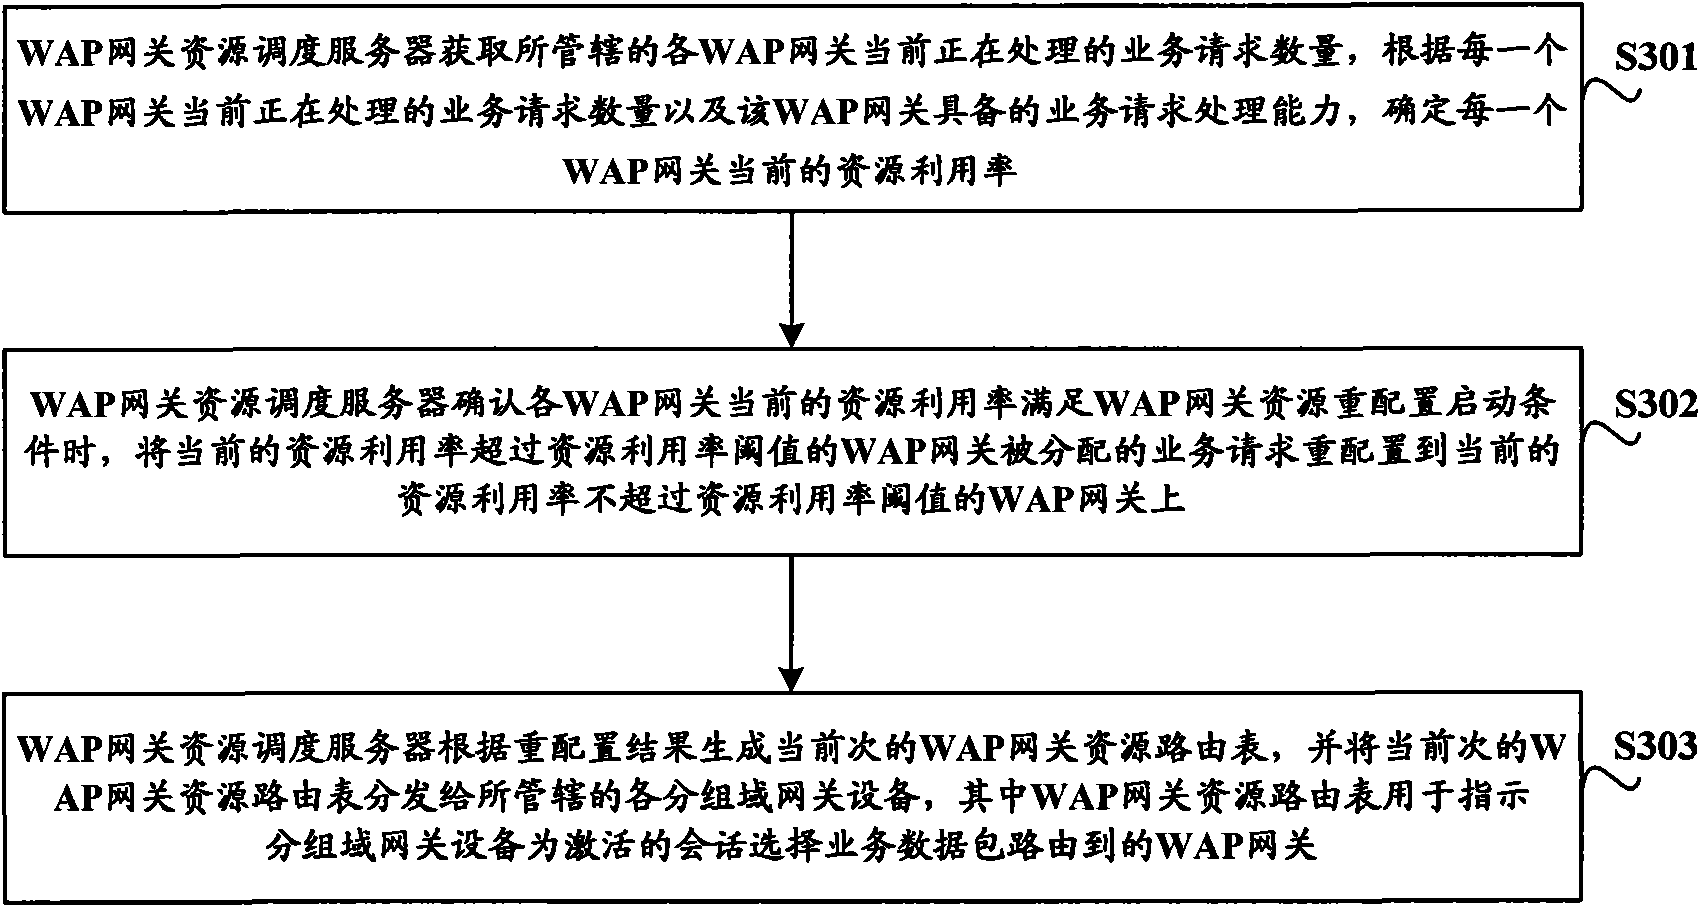 Method for scheduling wireless access protocol (WAP) gateway resources and associated equipment